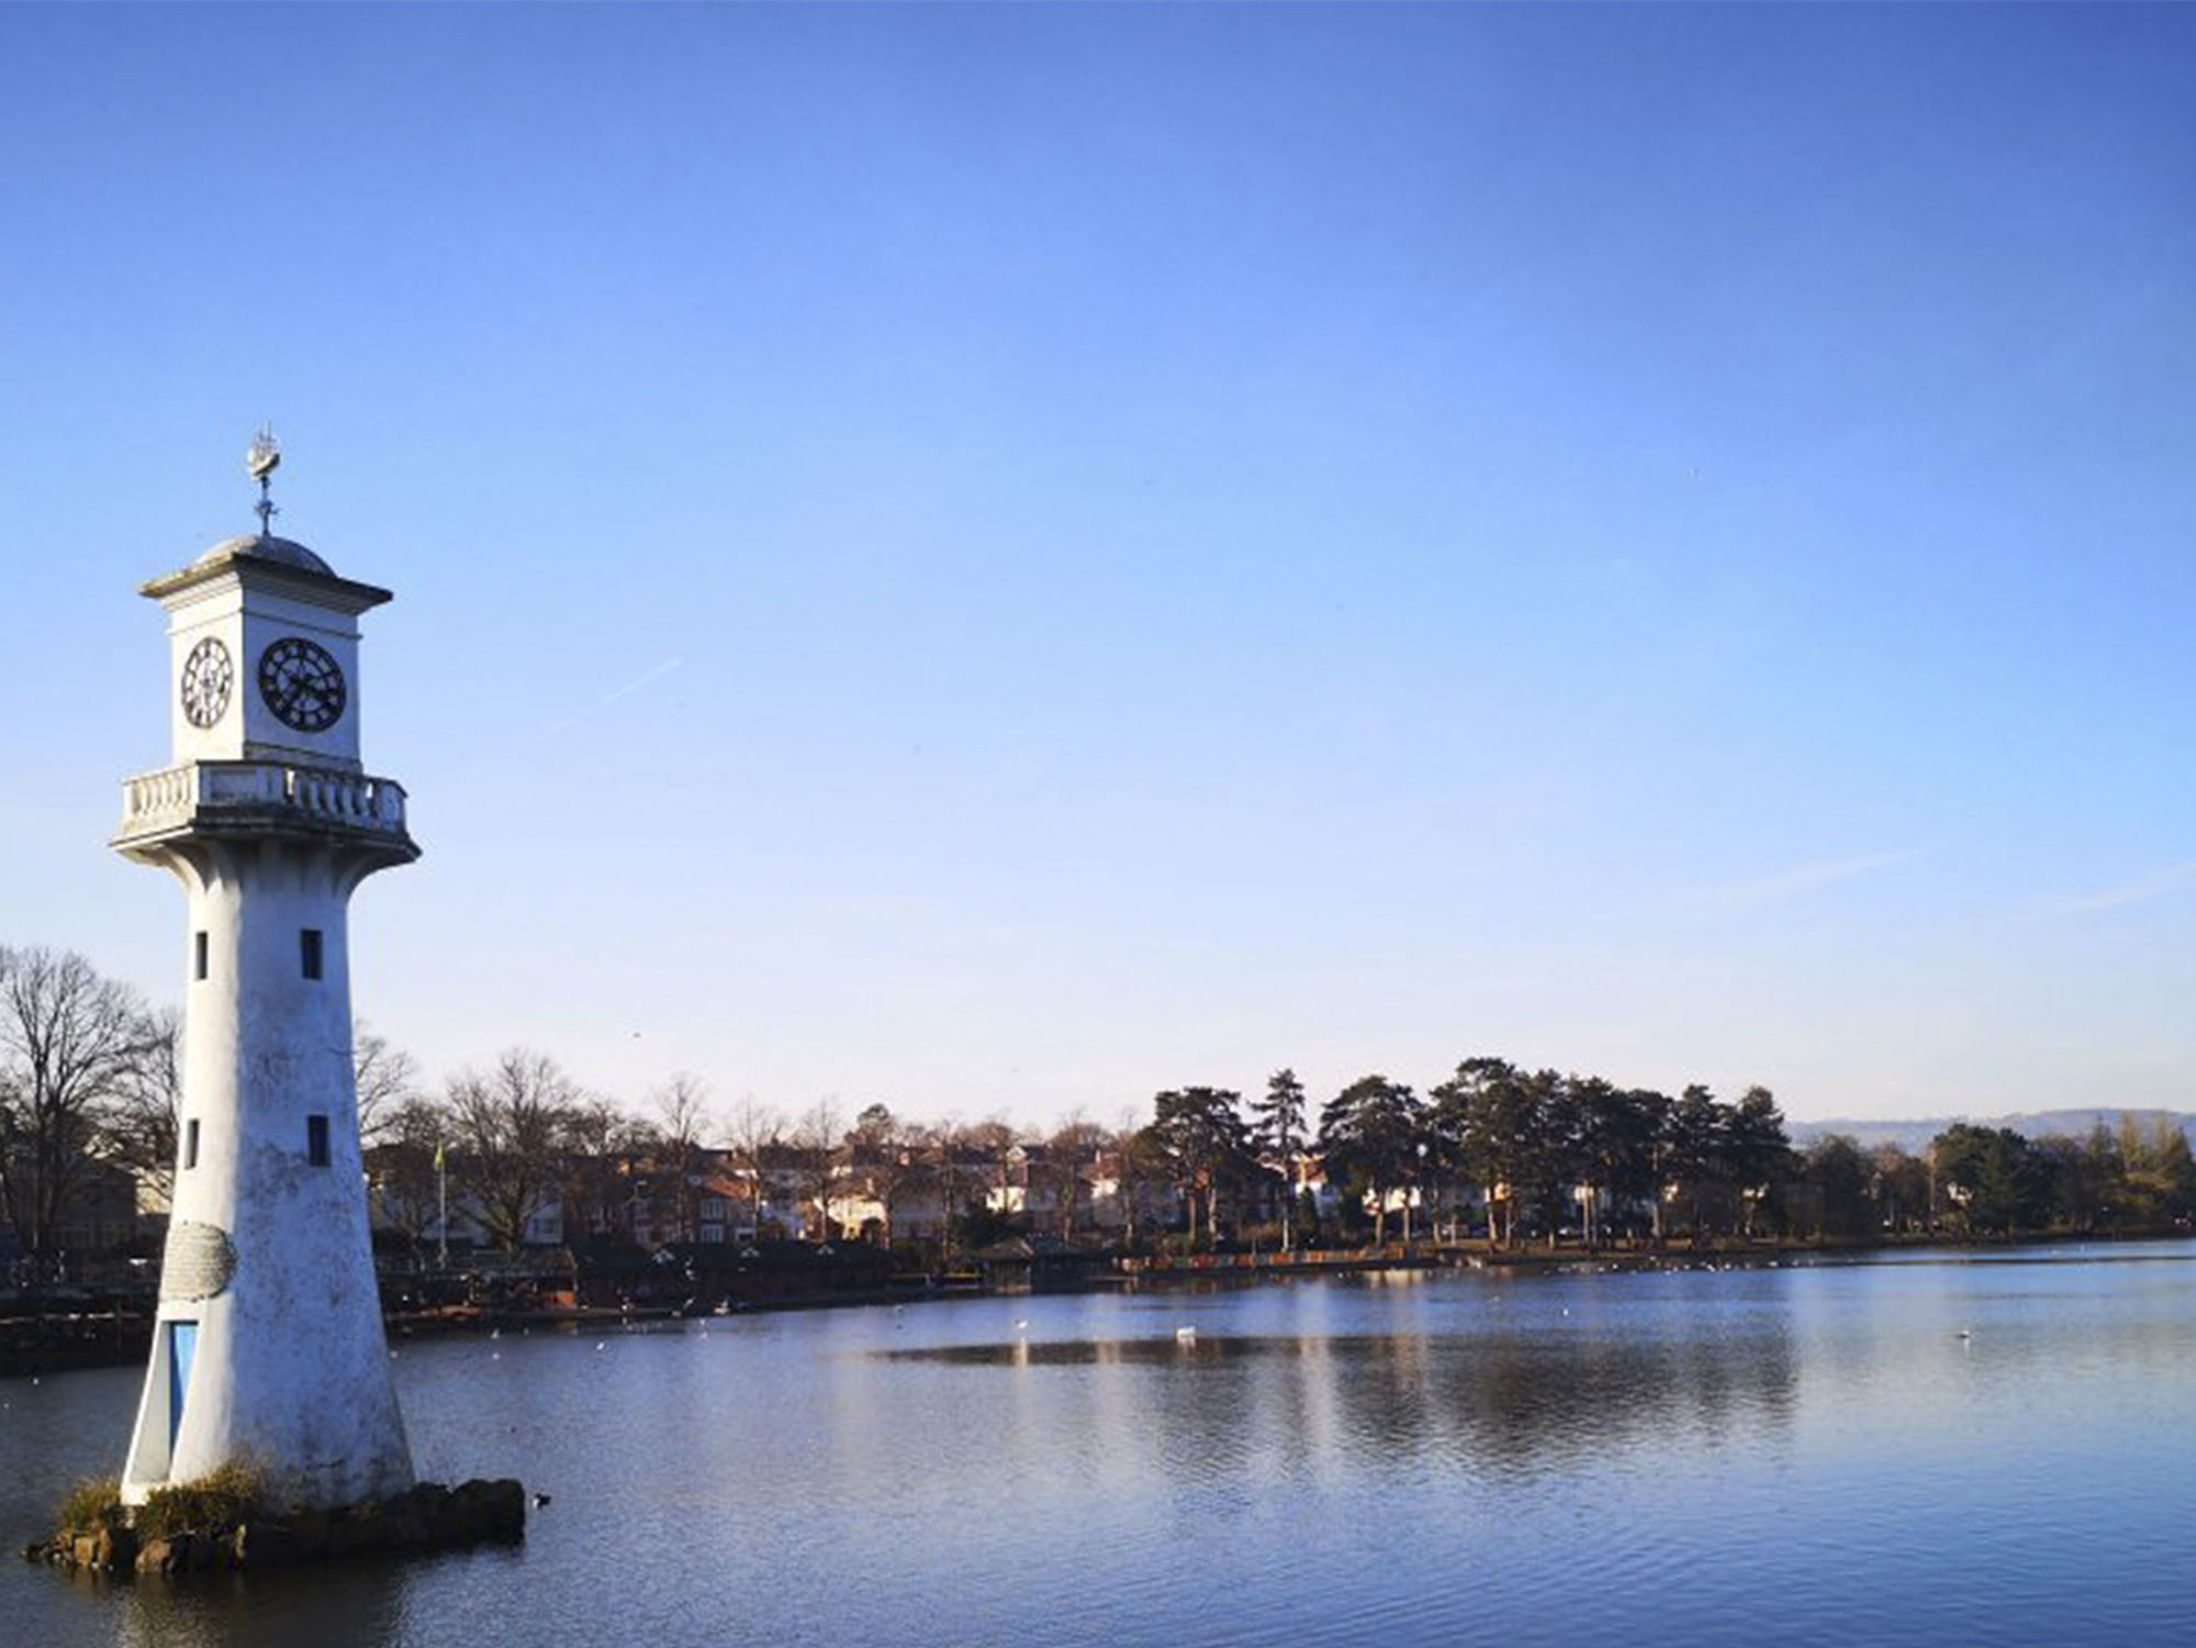 Things to do in Cardiff - Roath Park & Lake